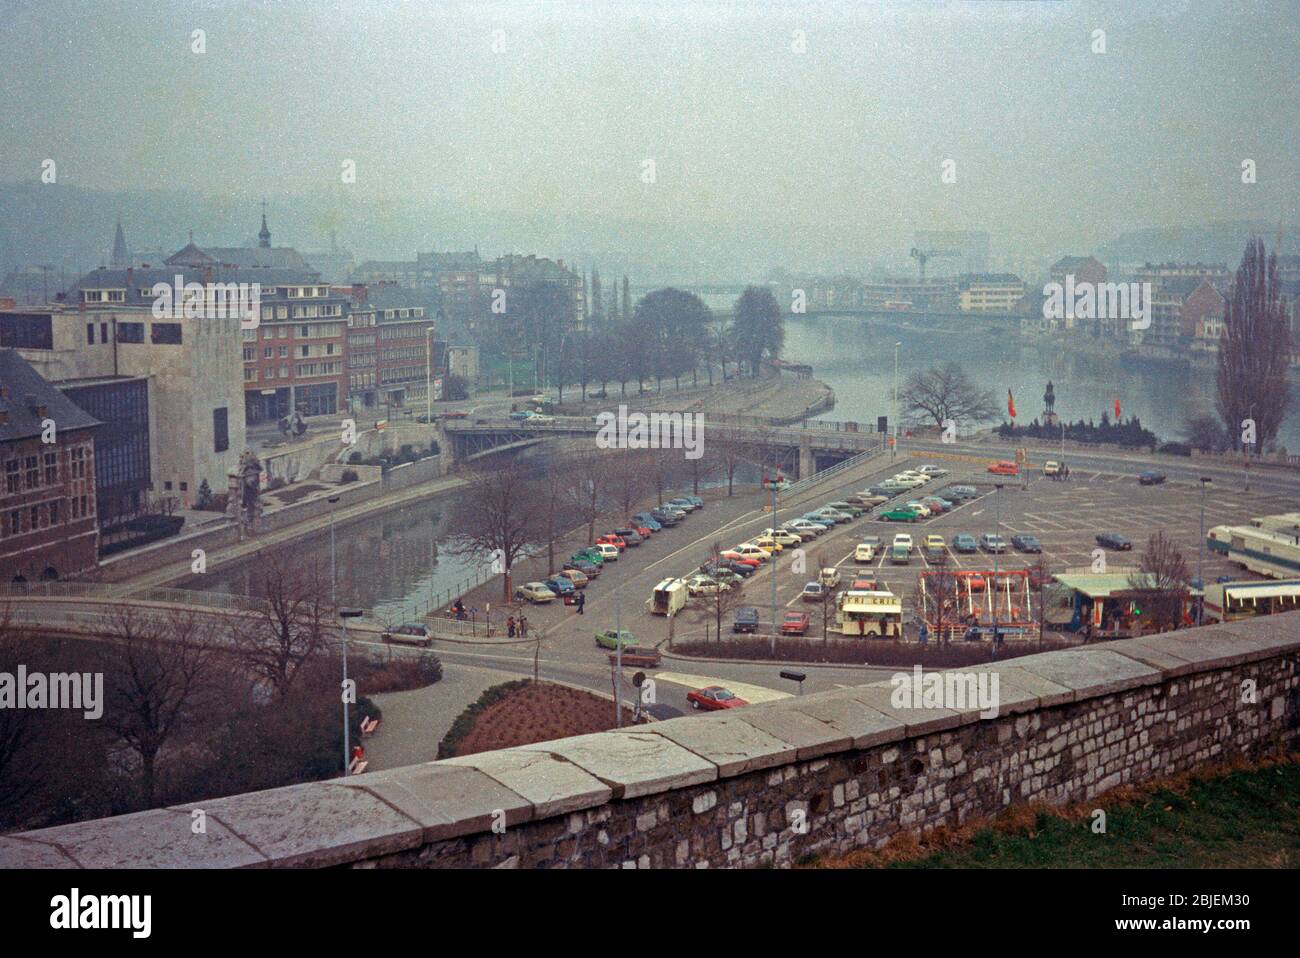 Le Grognon, historic town centre at the junction of the Rivers Meuse and Sambre, March 23, 1980, Namur, Wallonia, Belgium Stock Photo